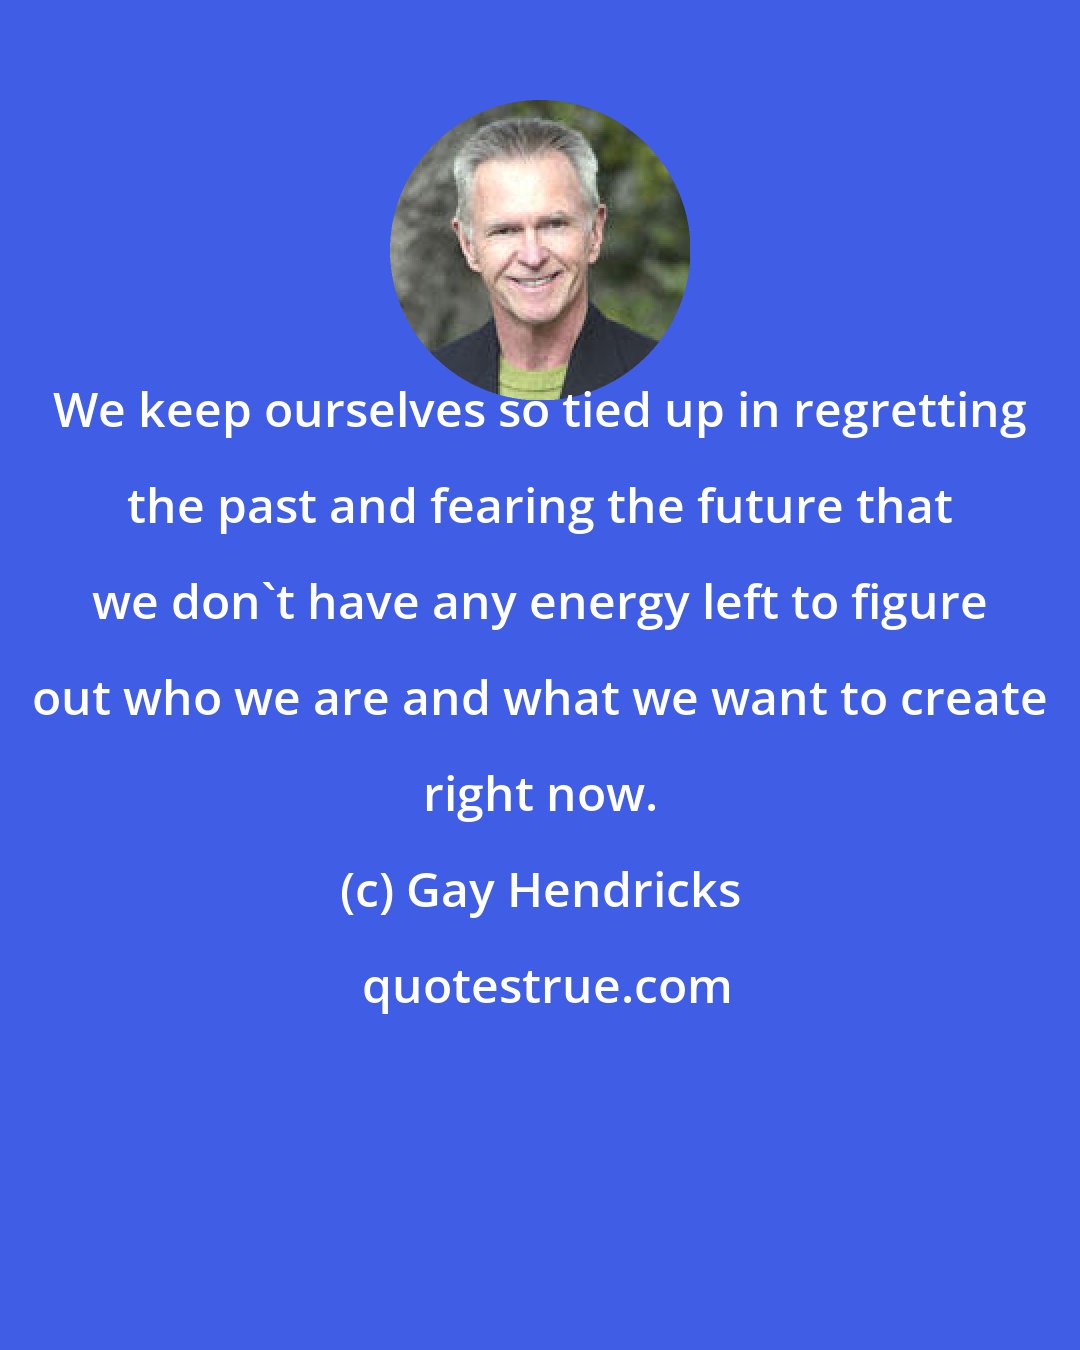 Gay Hendricks: We keep ourselves so tied up in regretting the past and fearing the future that we don't have any energy left to figure out who we are and what we want to create right now.